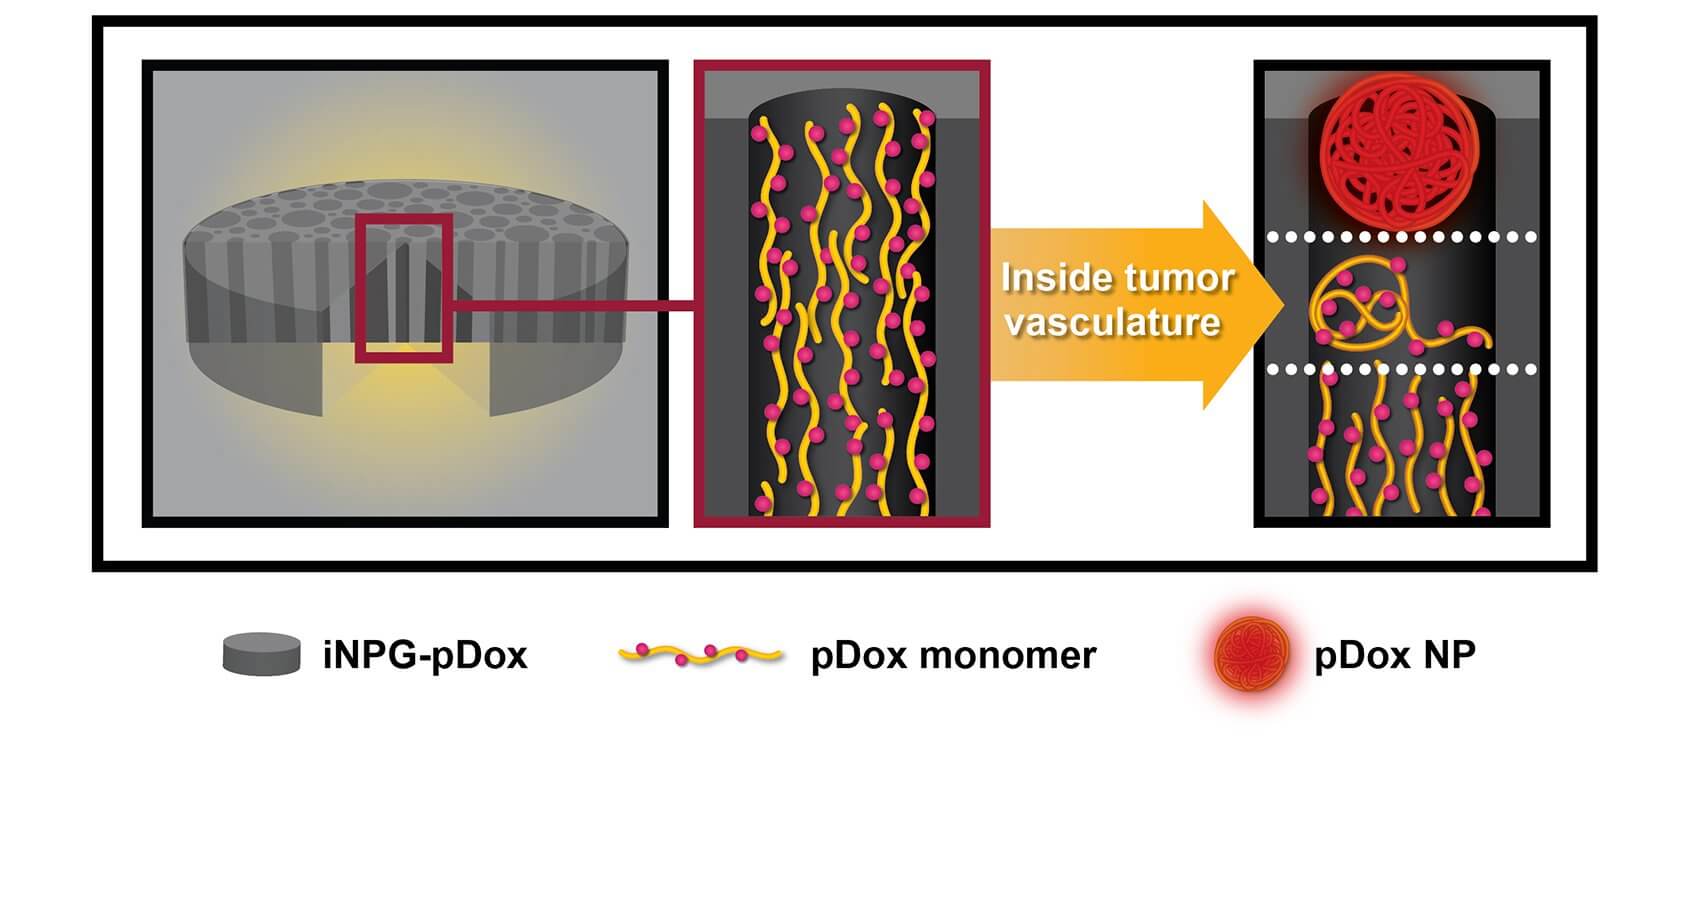 Silicon particles act as nanoparticle generators (iNPG) that carry string-like polymers loaded with a chemotherapy drug called doxorubicin (p-Dox) inside the nanopores. As the silicon particles dissolve in the tumor blood vessel, polymer molecules form tiny nanoparticles and are released.